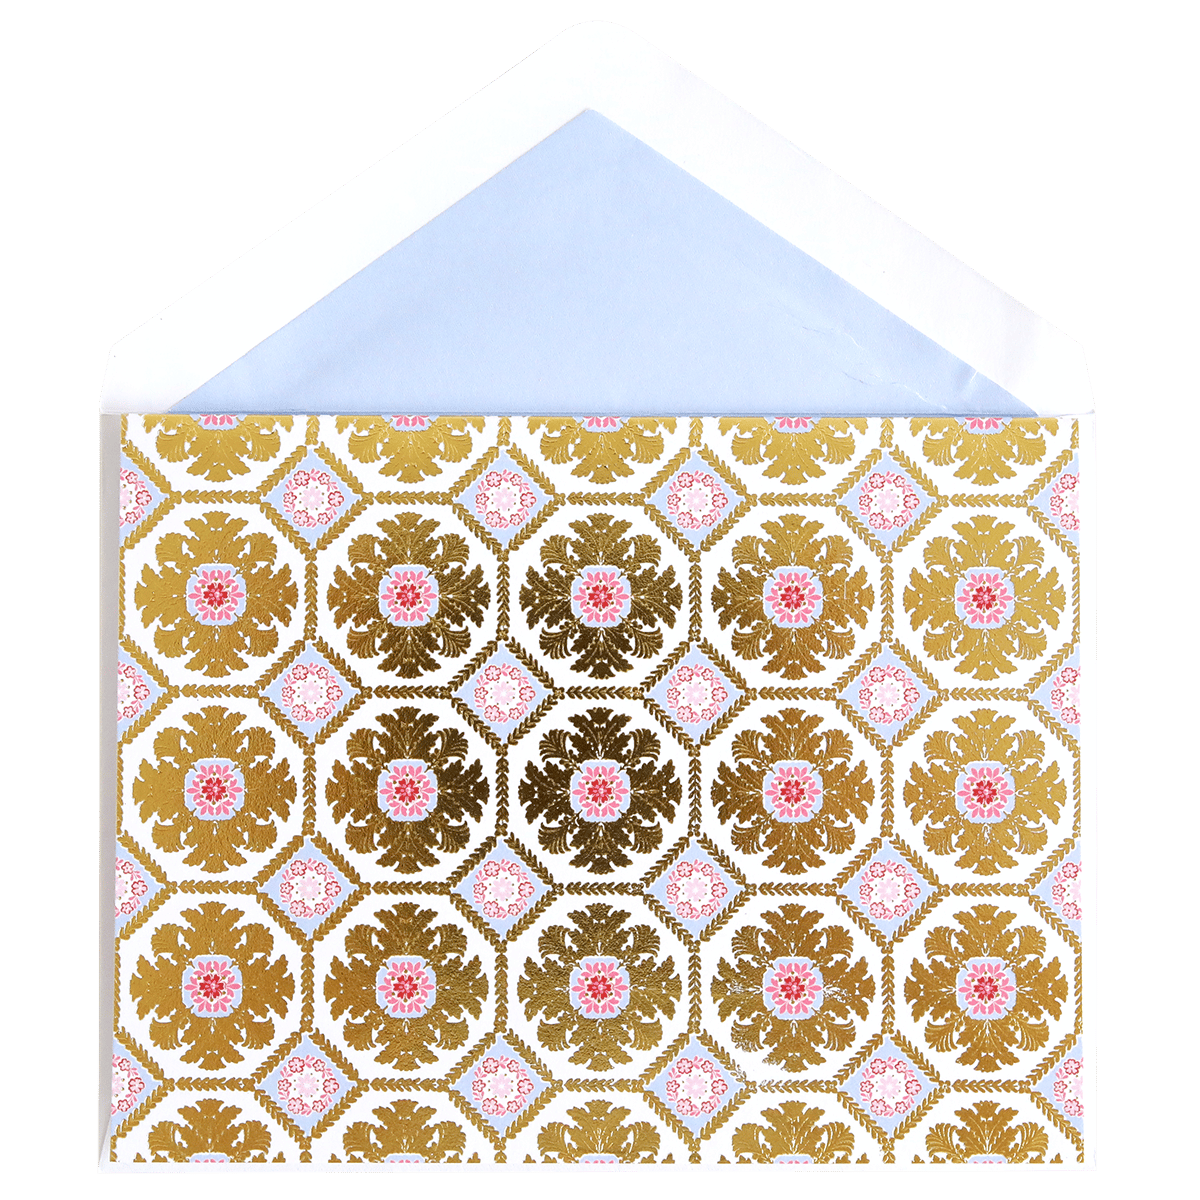 a white envelope with a gold and pink pattern.